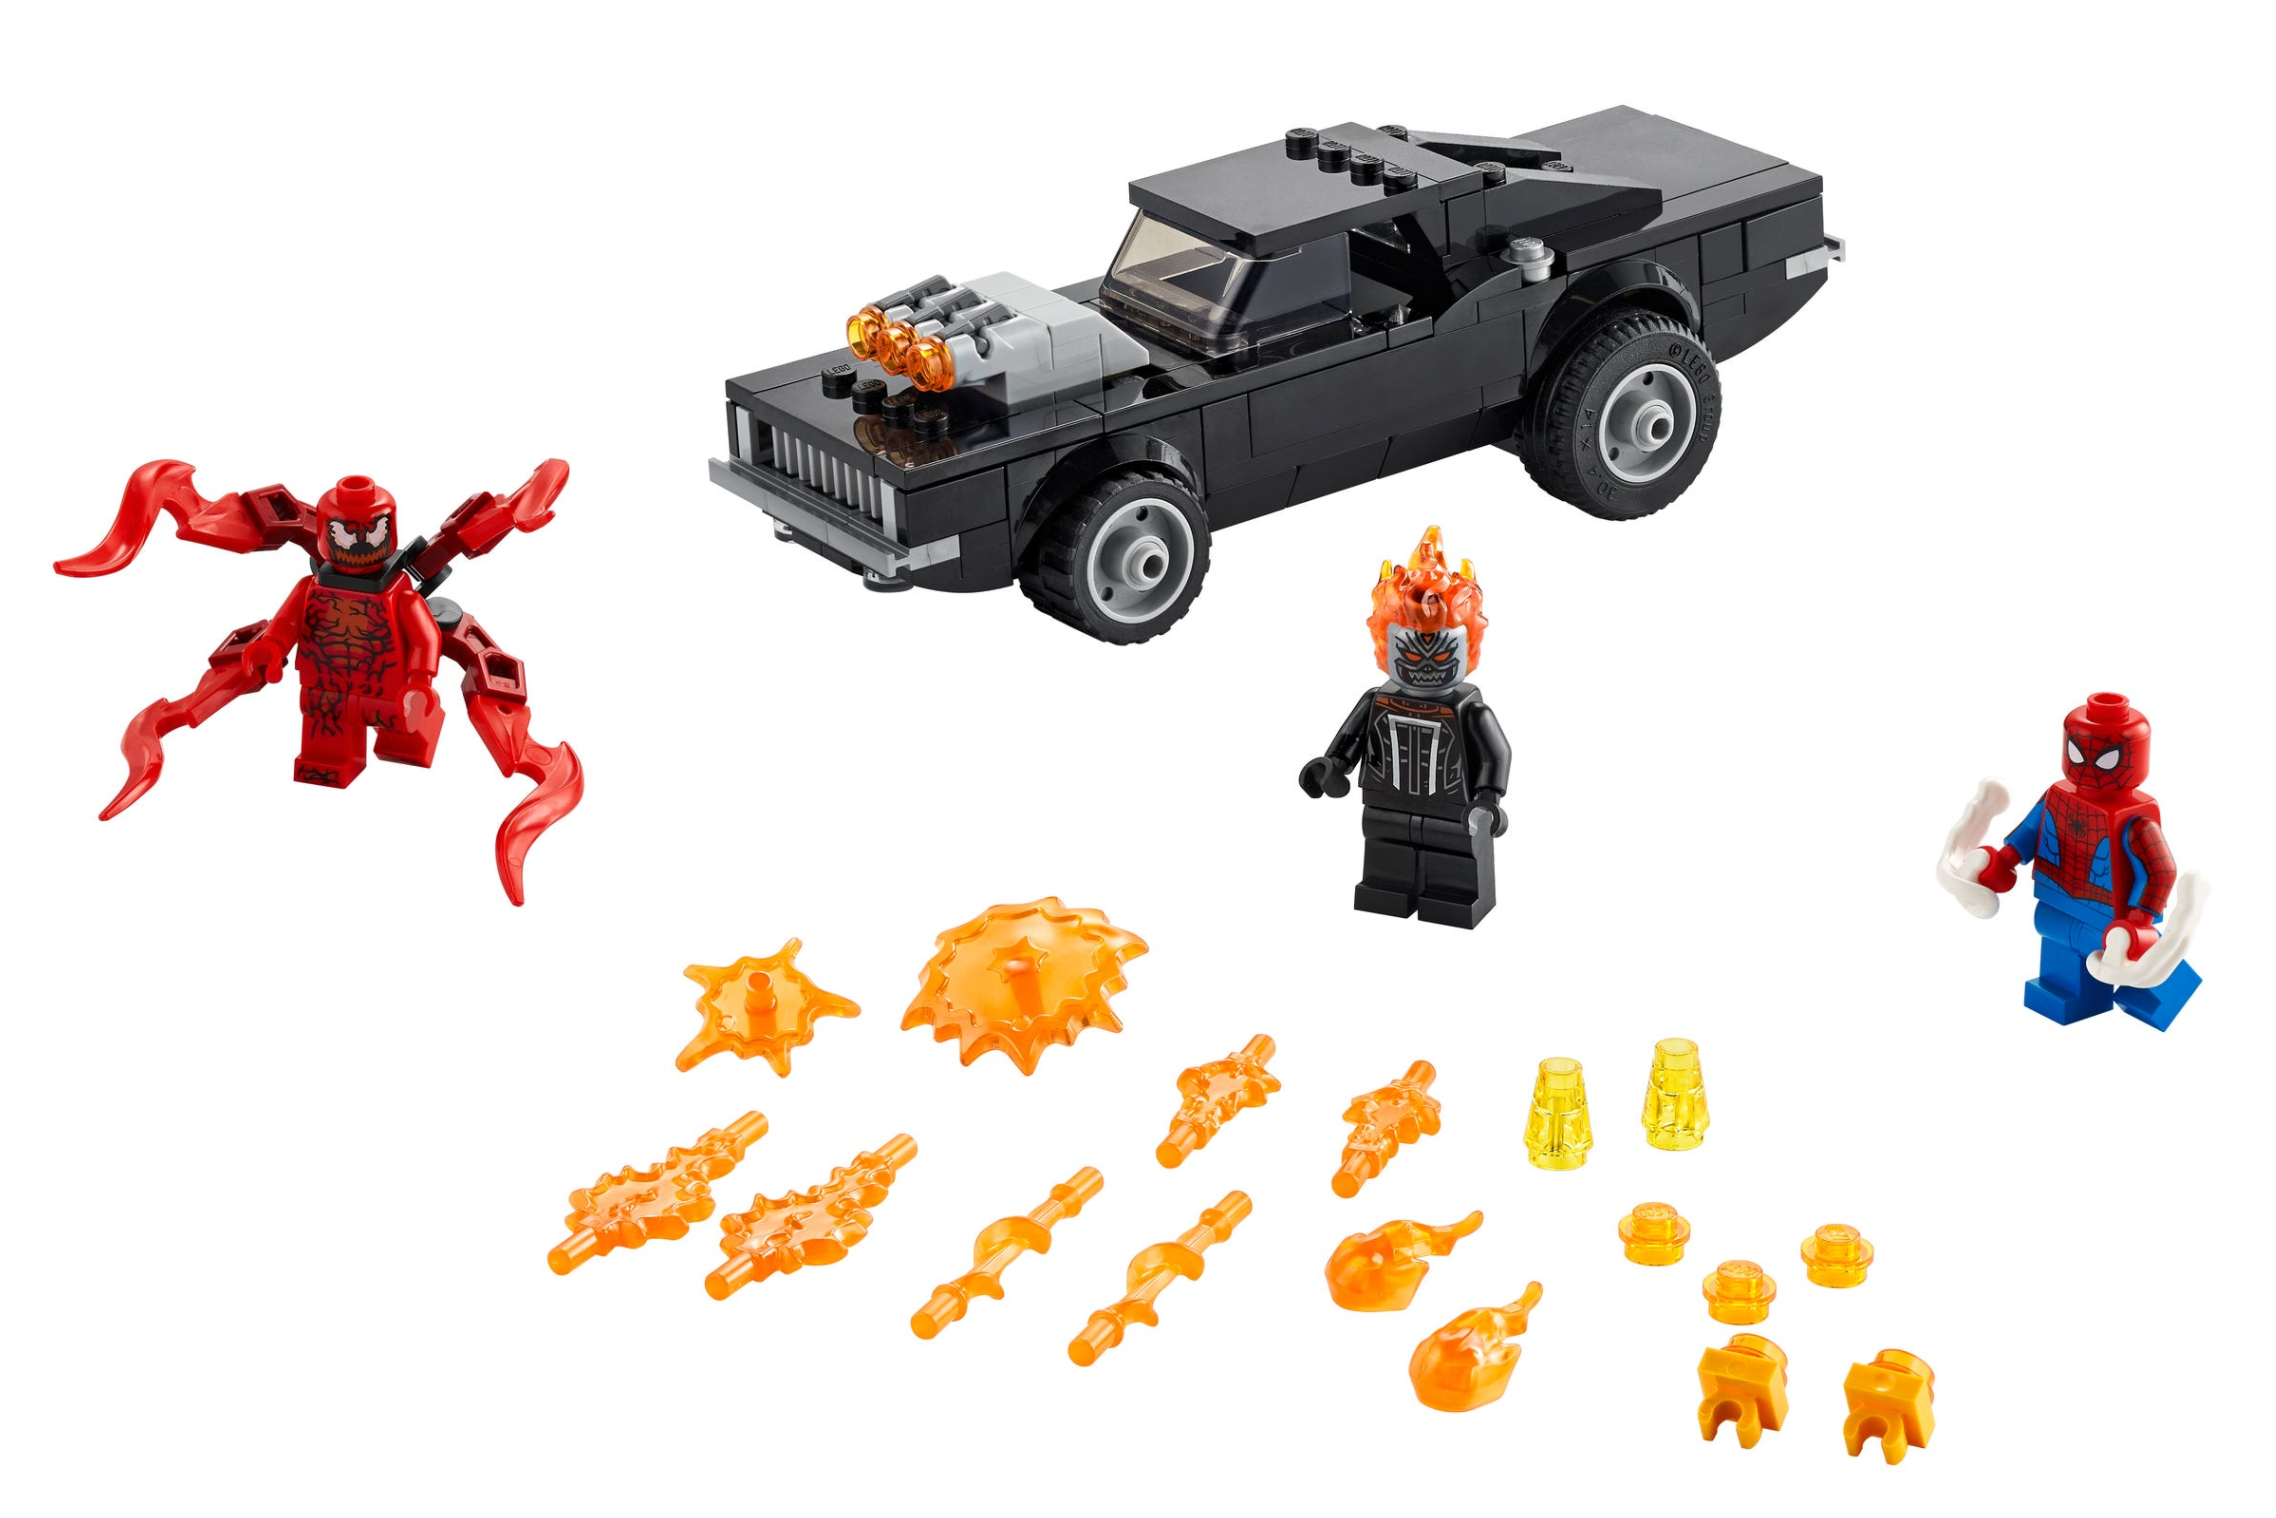 LEGO: Super Heroes - Spider-Man and Ghost Rider vs. Carnage